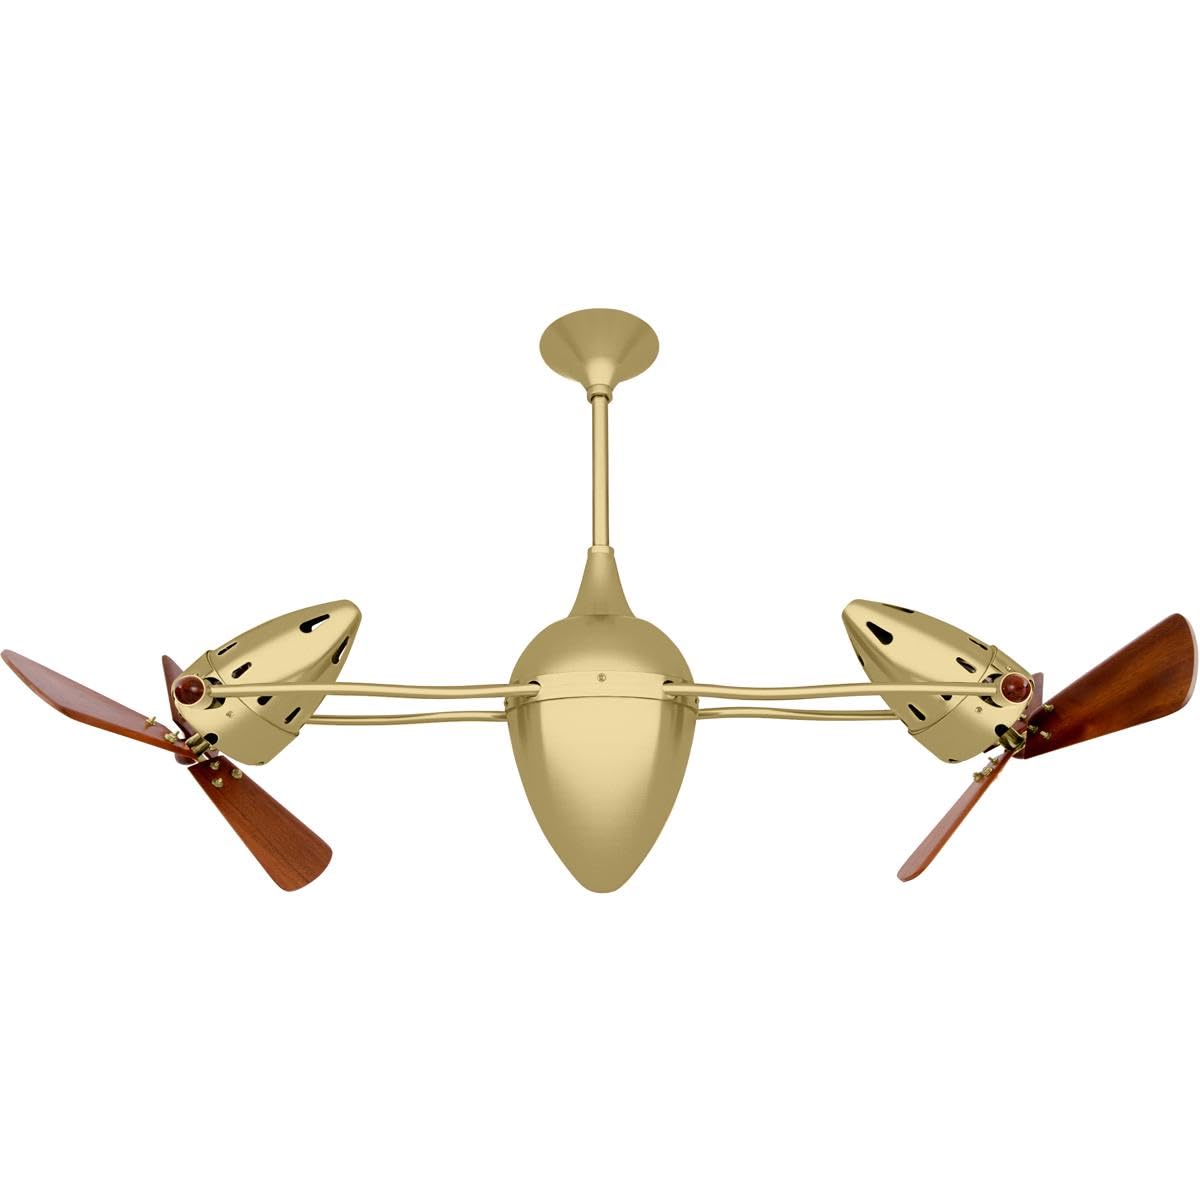 Matthews Fan AR-BRBR-WD Ar Ruthiane 360° dual headed rotational ceiling fan in brushed brass finish with solid sustainable mahogany wood blades.